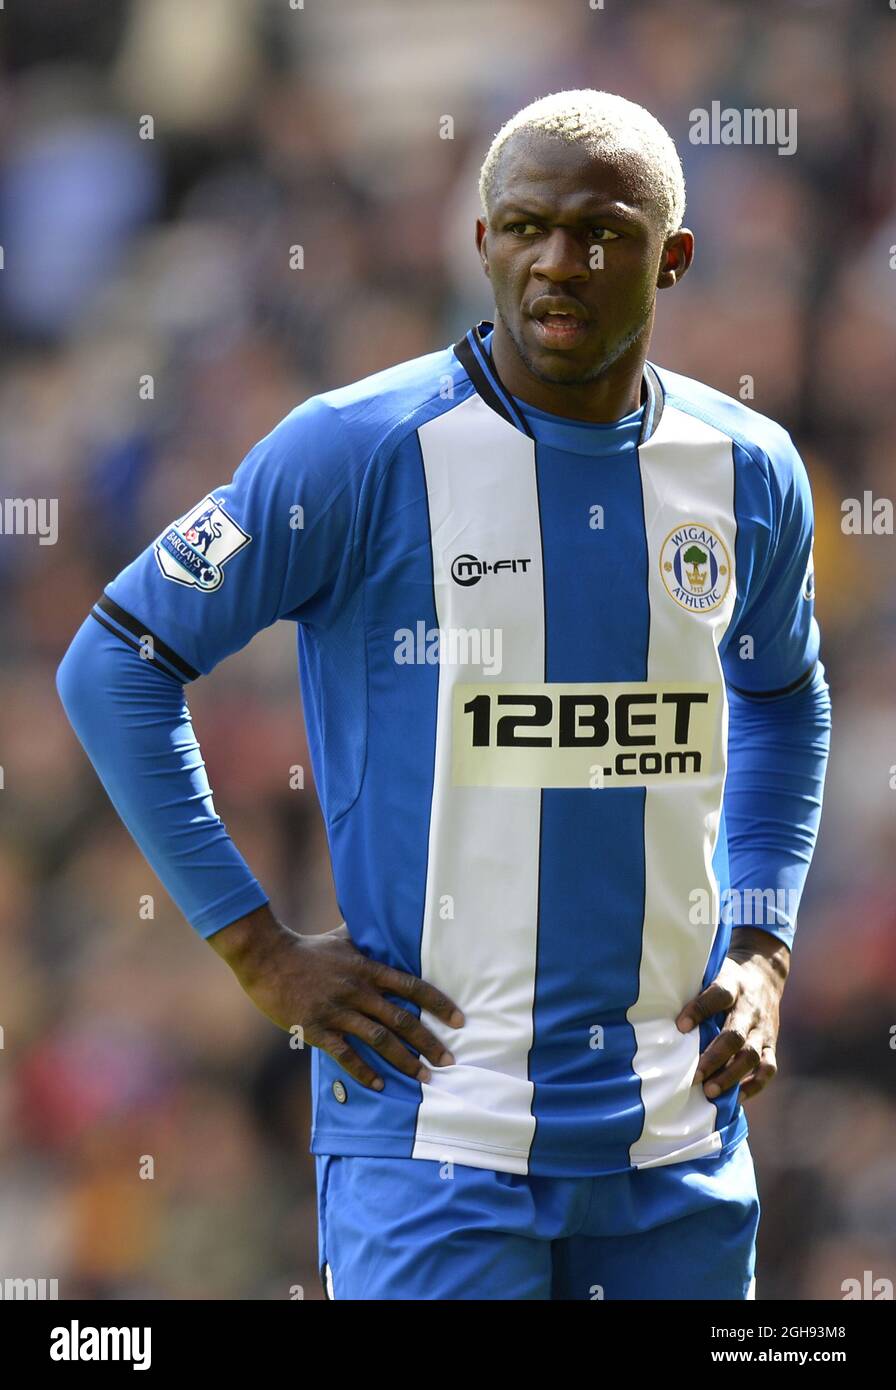 Arouna Kone of Wigan during the Barclays Premier League match between Wigan Athletic and Tottenham Hotspur at the DW Stadium in Wigan, UK on April 27, 2013. Stock Photo